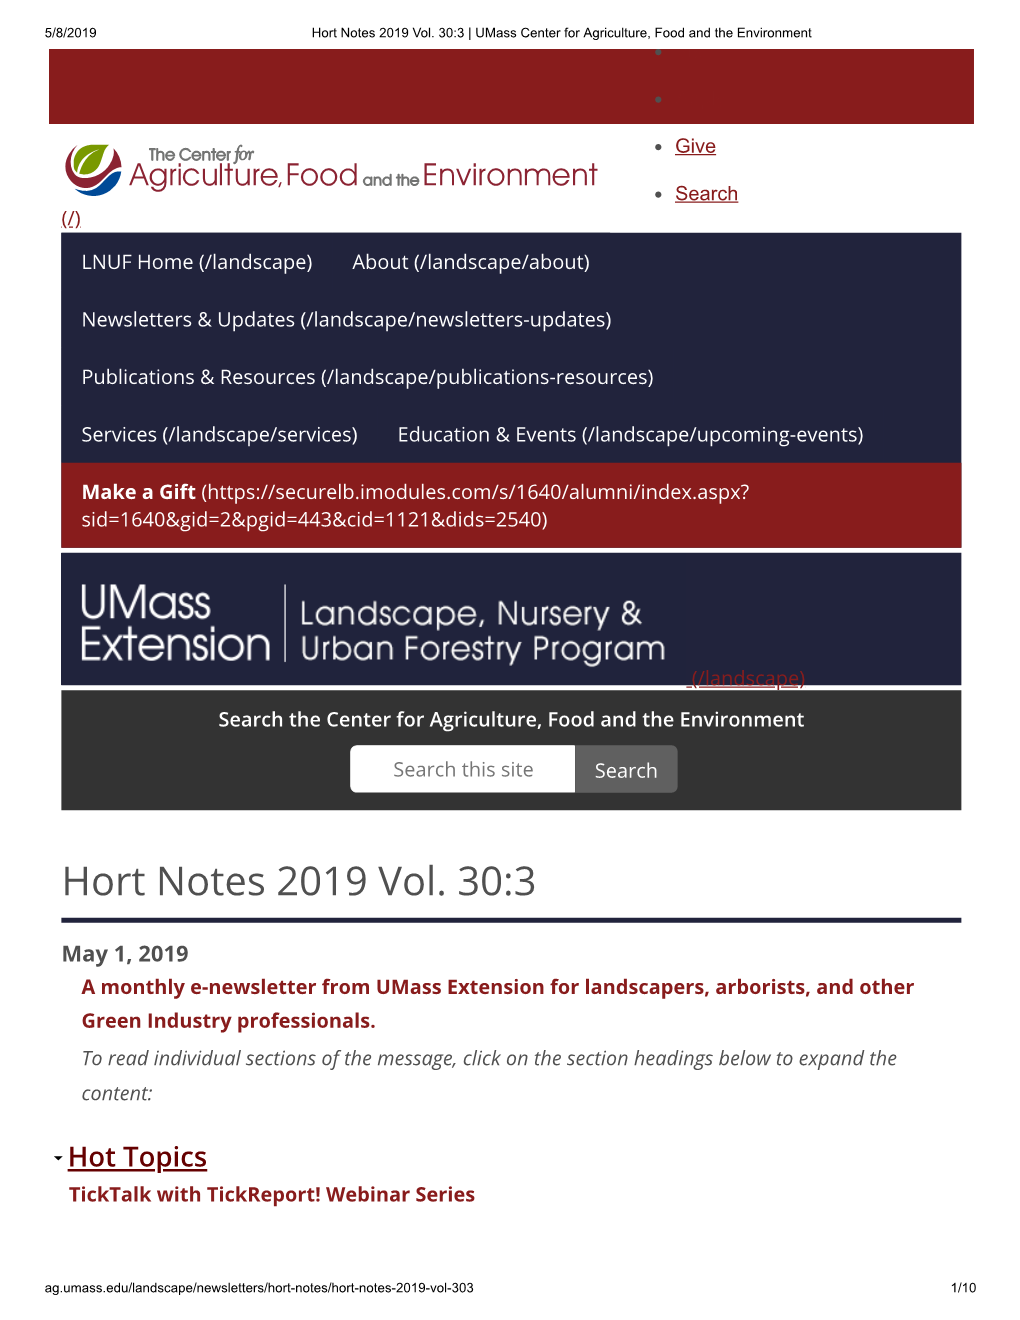 Hort Notes 2019 Vol. 30:3 | Umass Center for Agriculture, Food and the Environment Visit